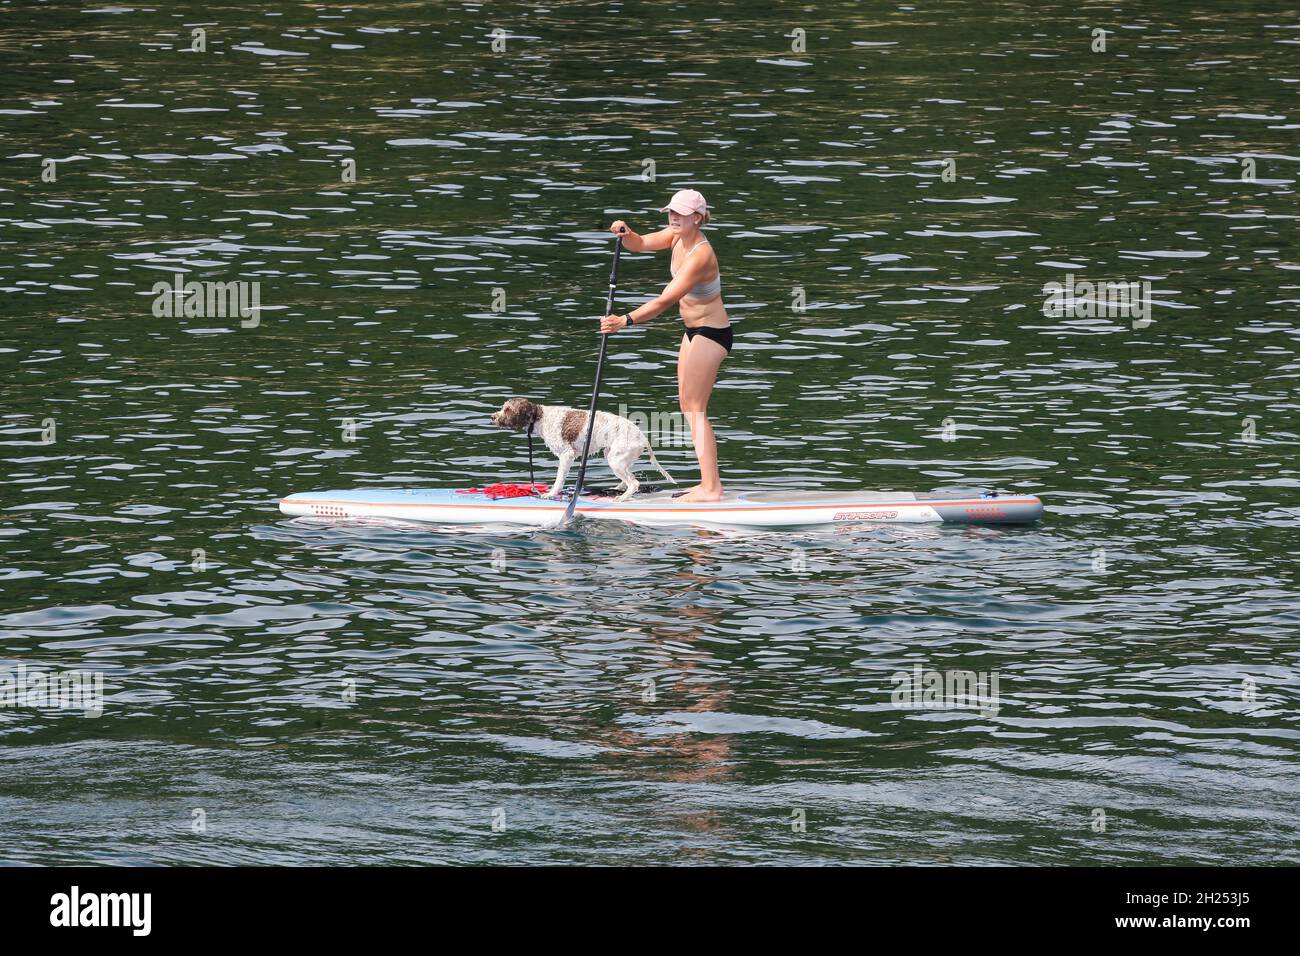 Aarhus, Denmark - August 7, 2018: Woman stand up with a dog on a paddle board on the sea Stock Photo